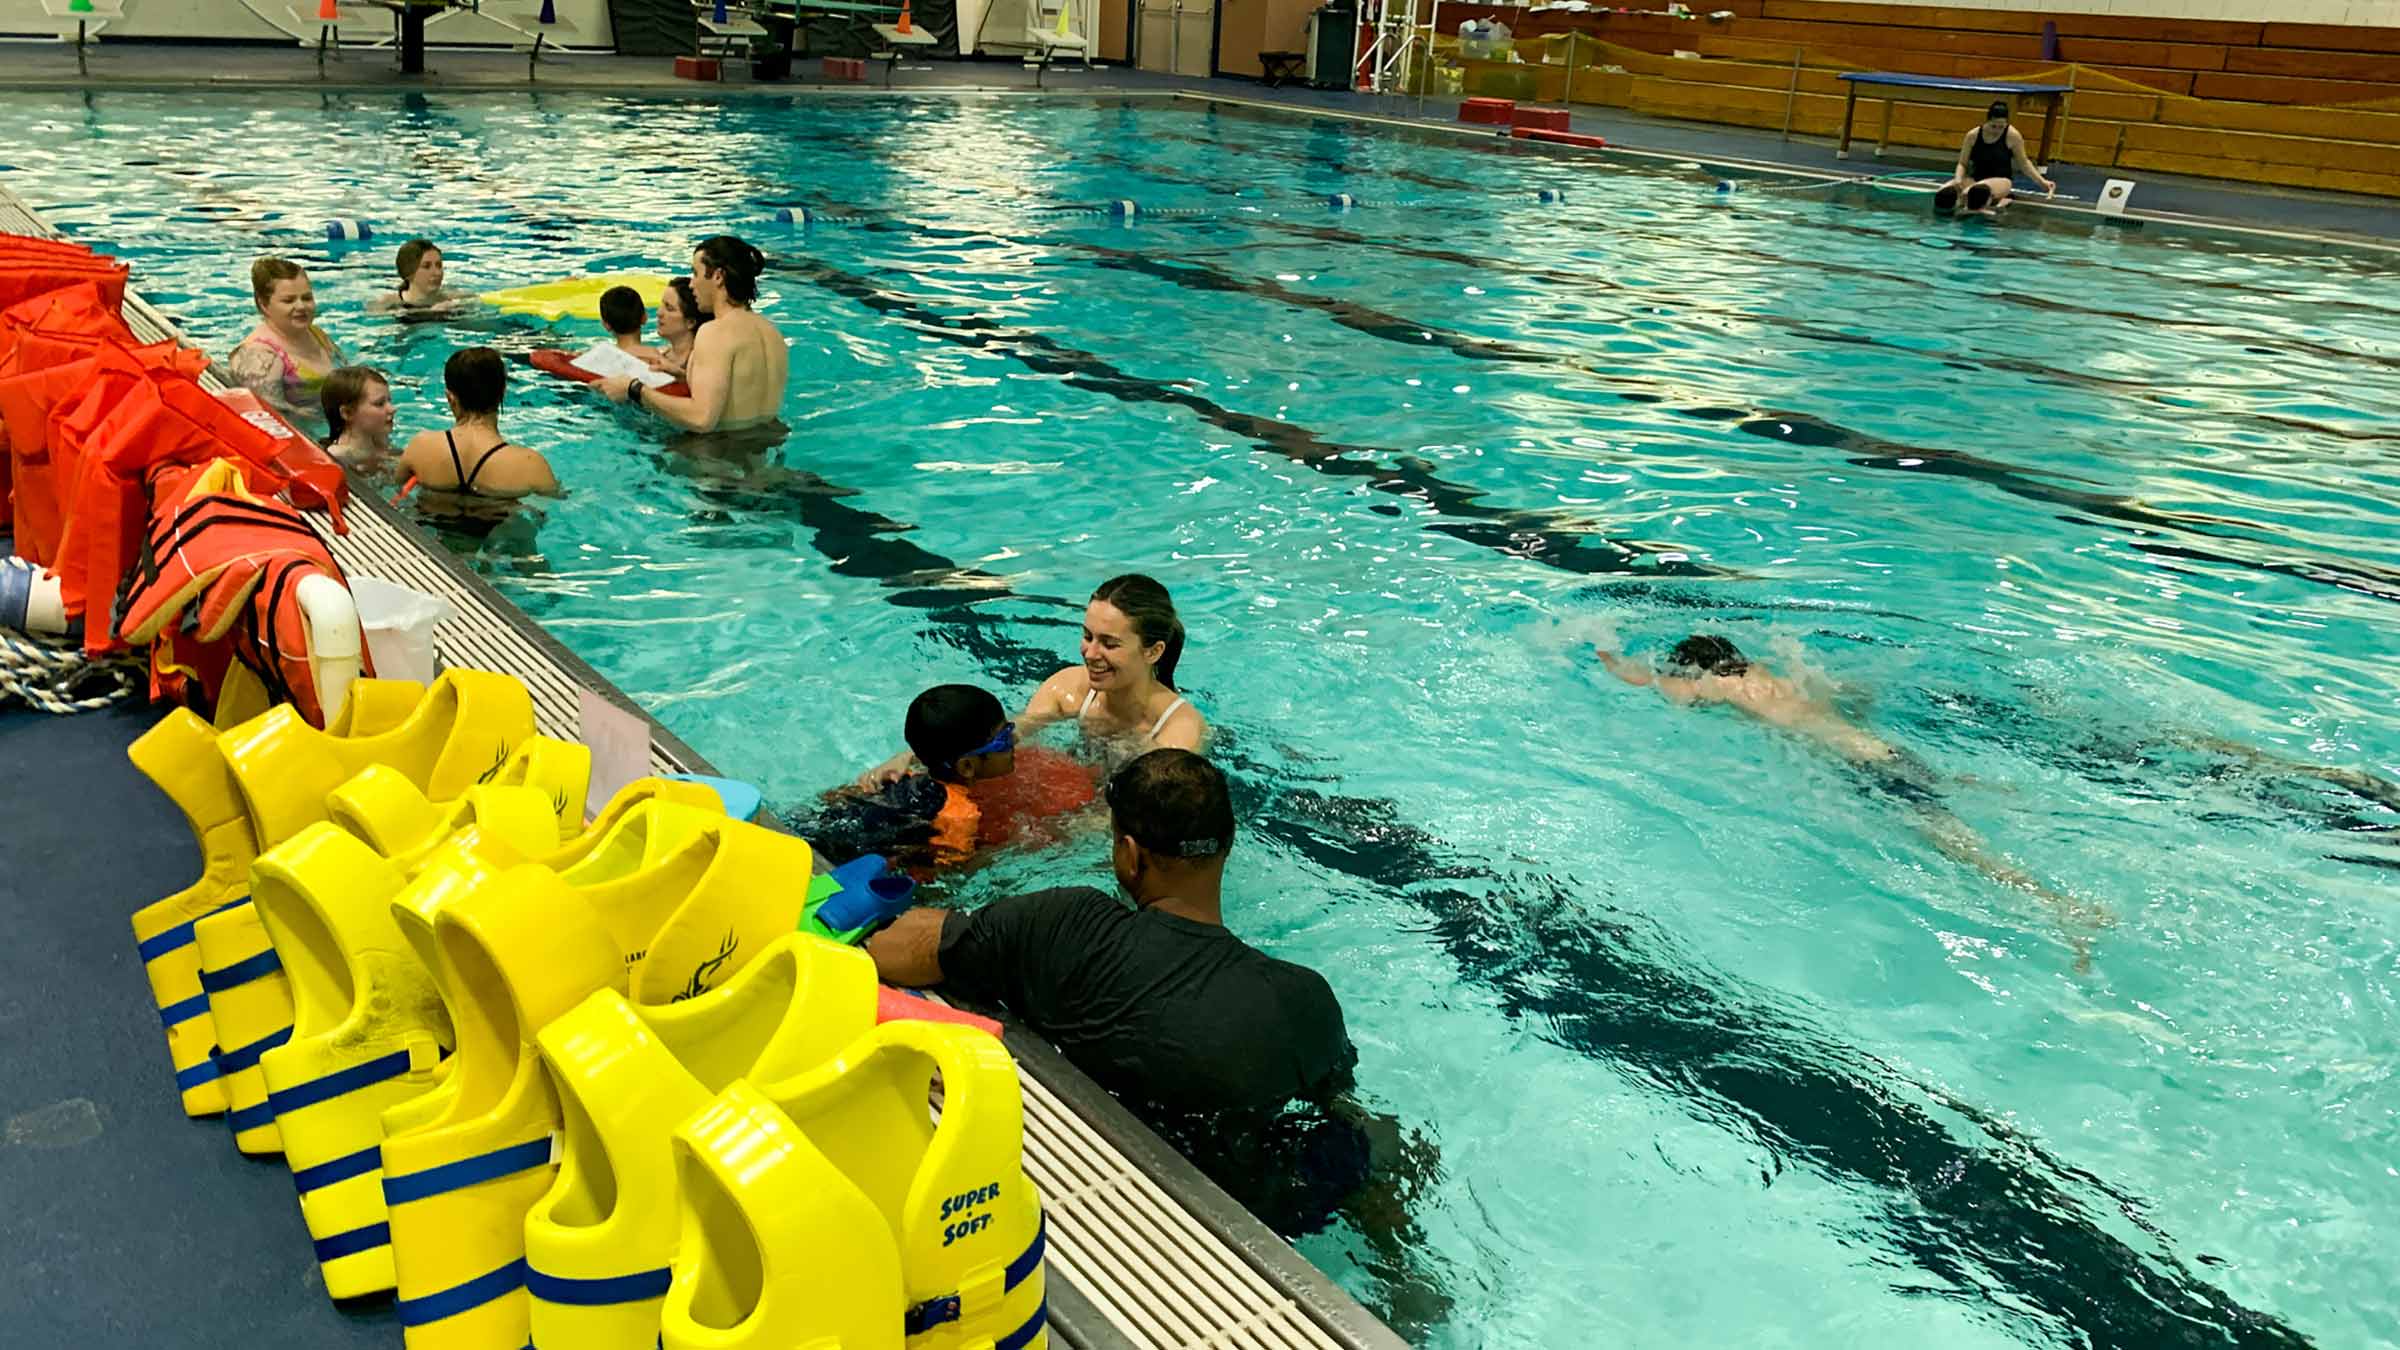 Ohio State study: For autistic kids, specialized swim lessons could decrease drowning risk